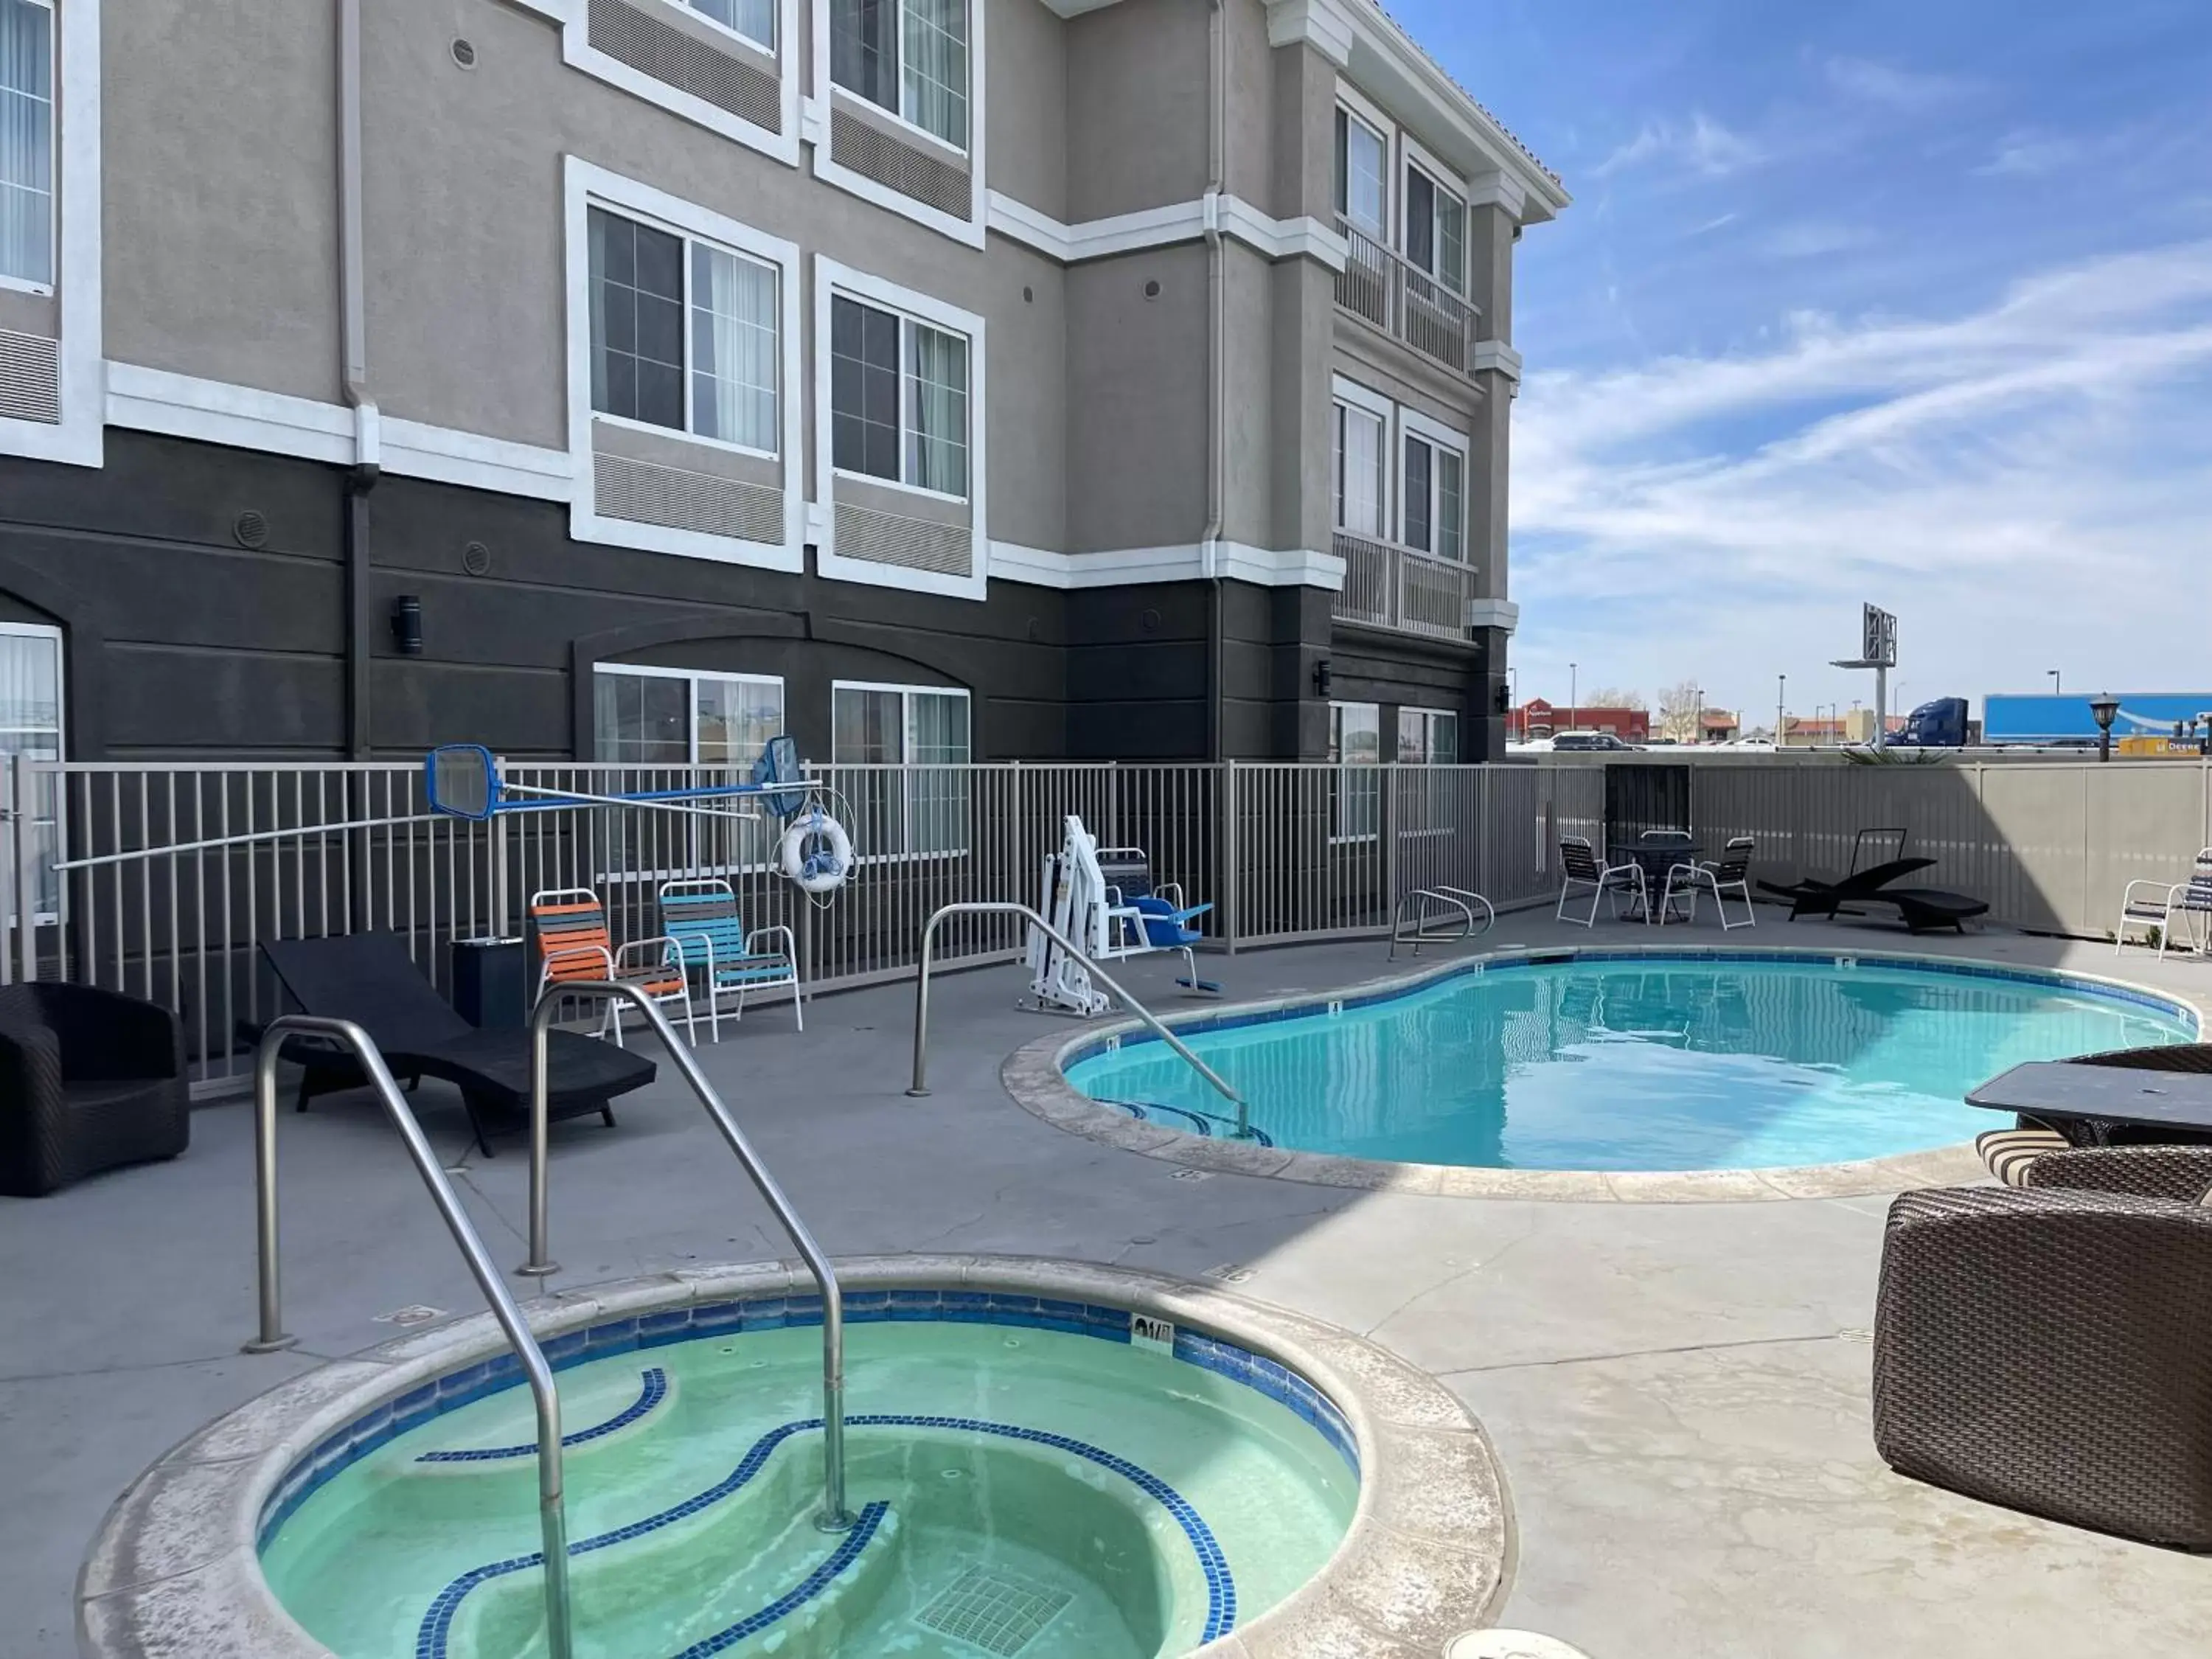 Hot Tub, Swimming Pool in La Quinta Inn & Suites by Wyndham Hesperia Victorville